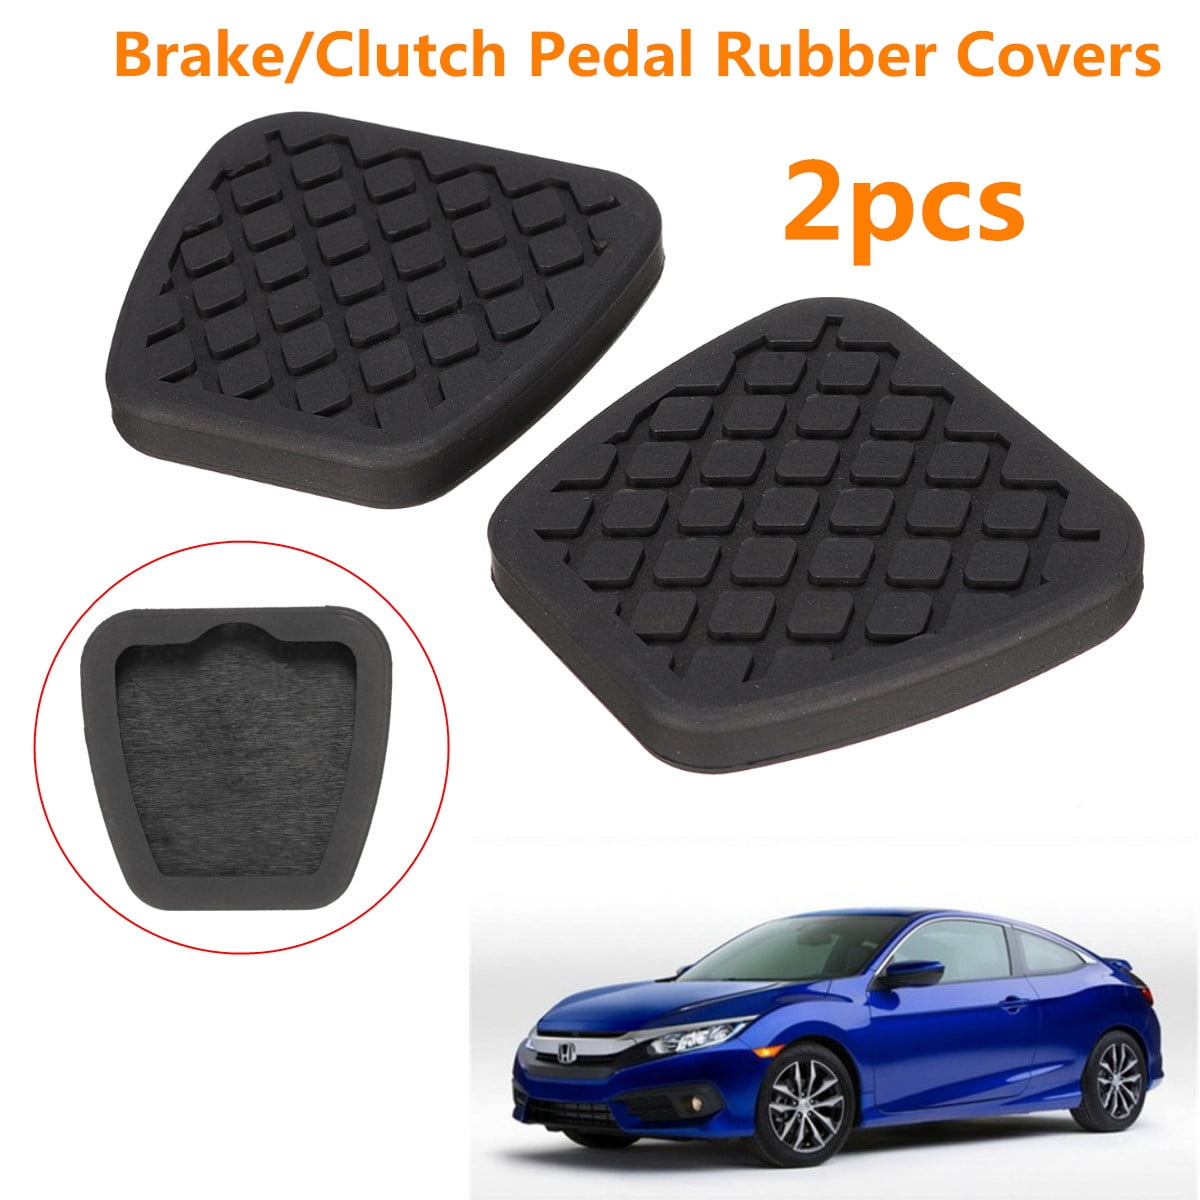 2x Brake Clutch Pedal Rubber Cover 46545-SA5-000 Fit For Honda Accord Civic ss